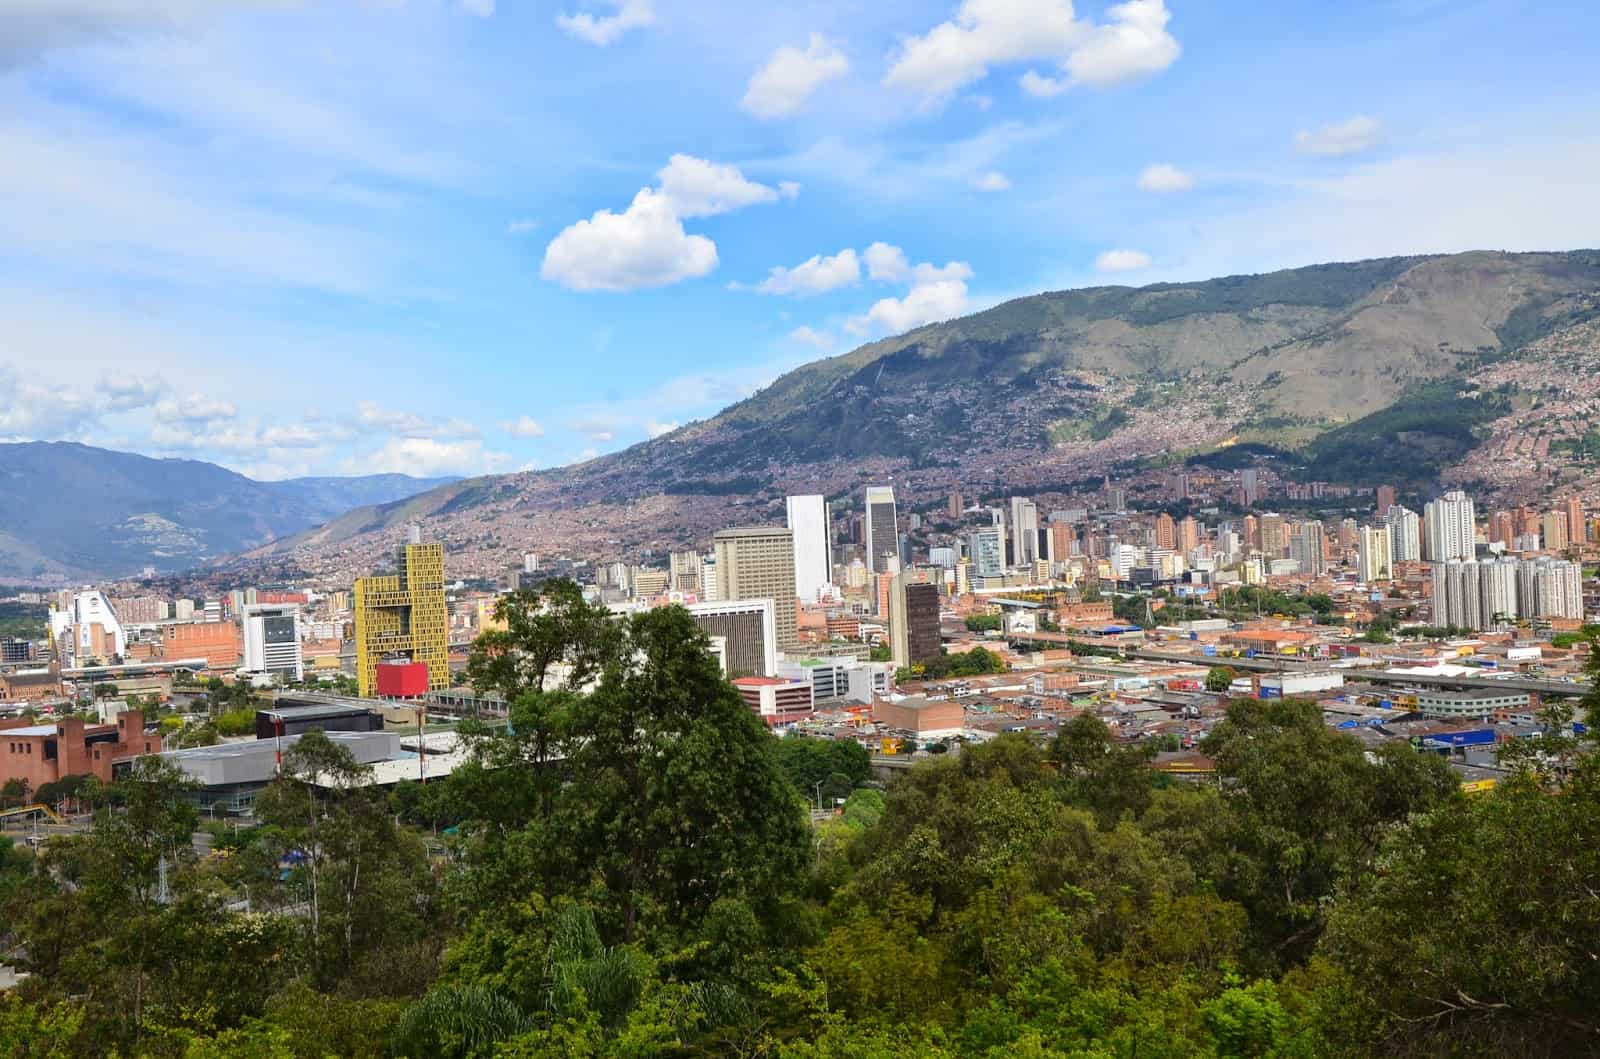 View of Medellín from Nutibara Hill, Antioquia, Colombia